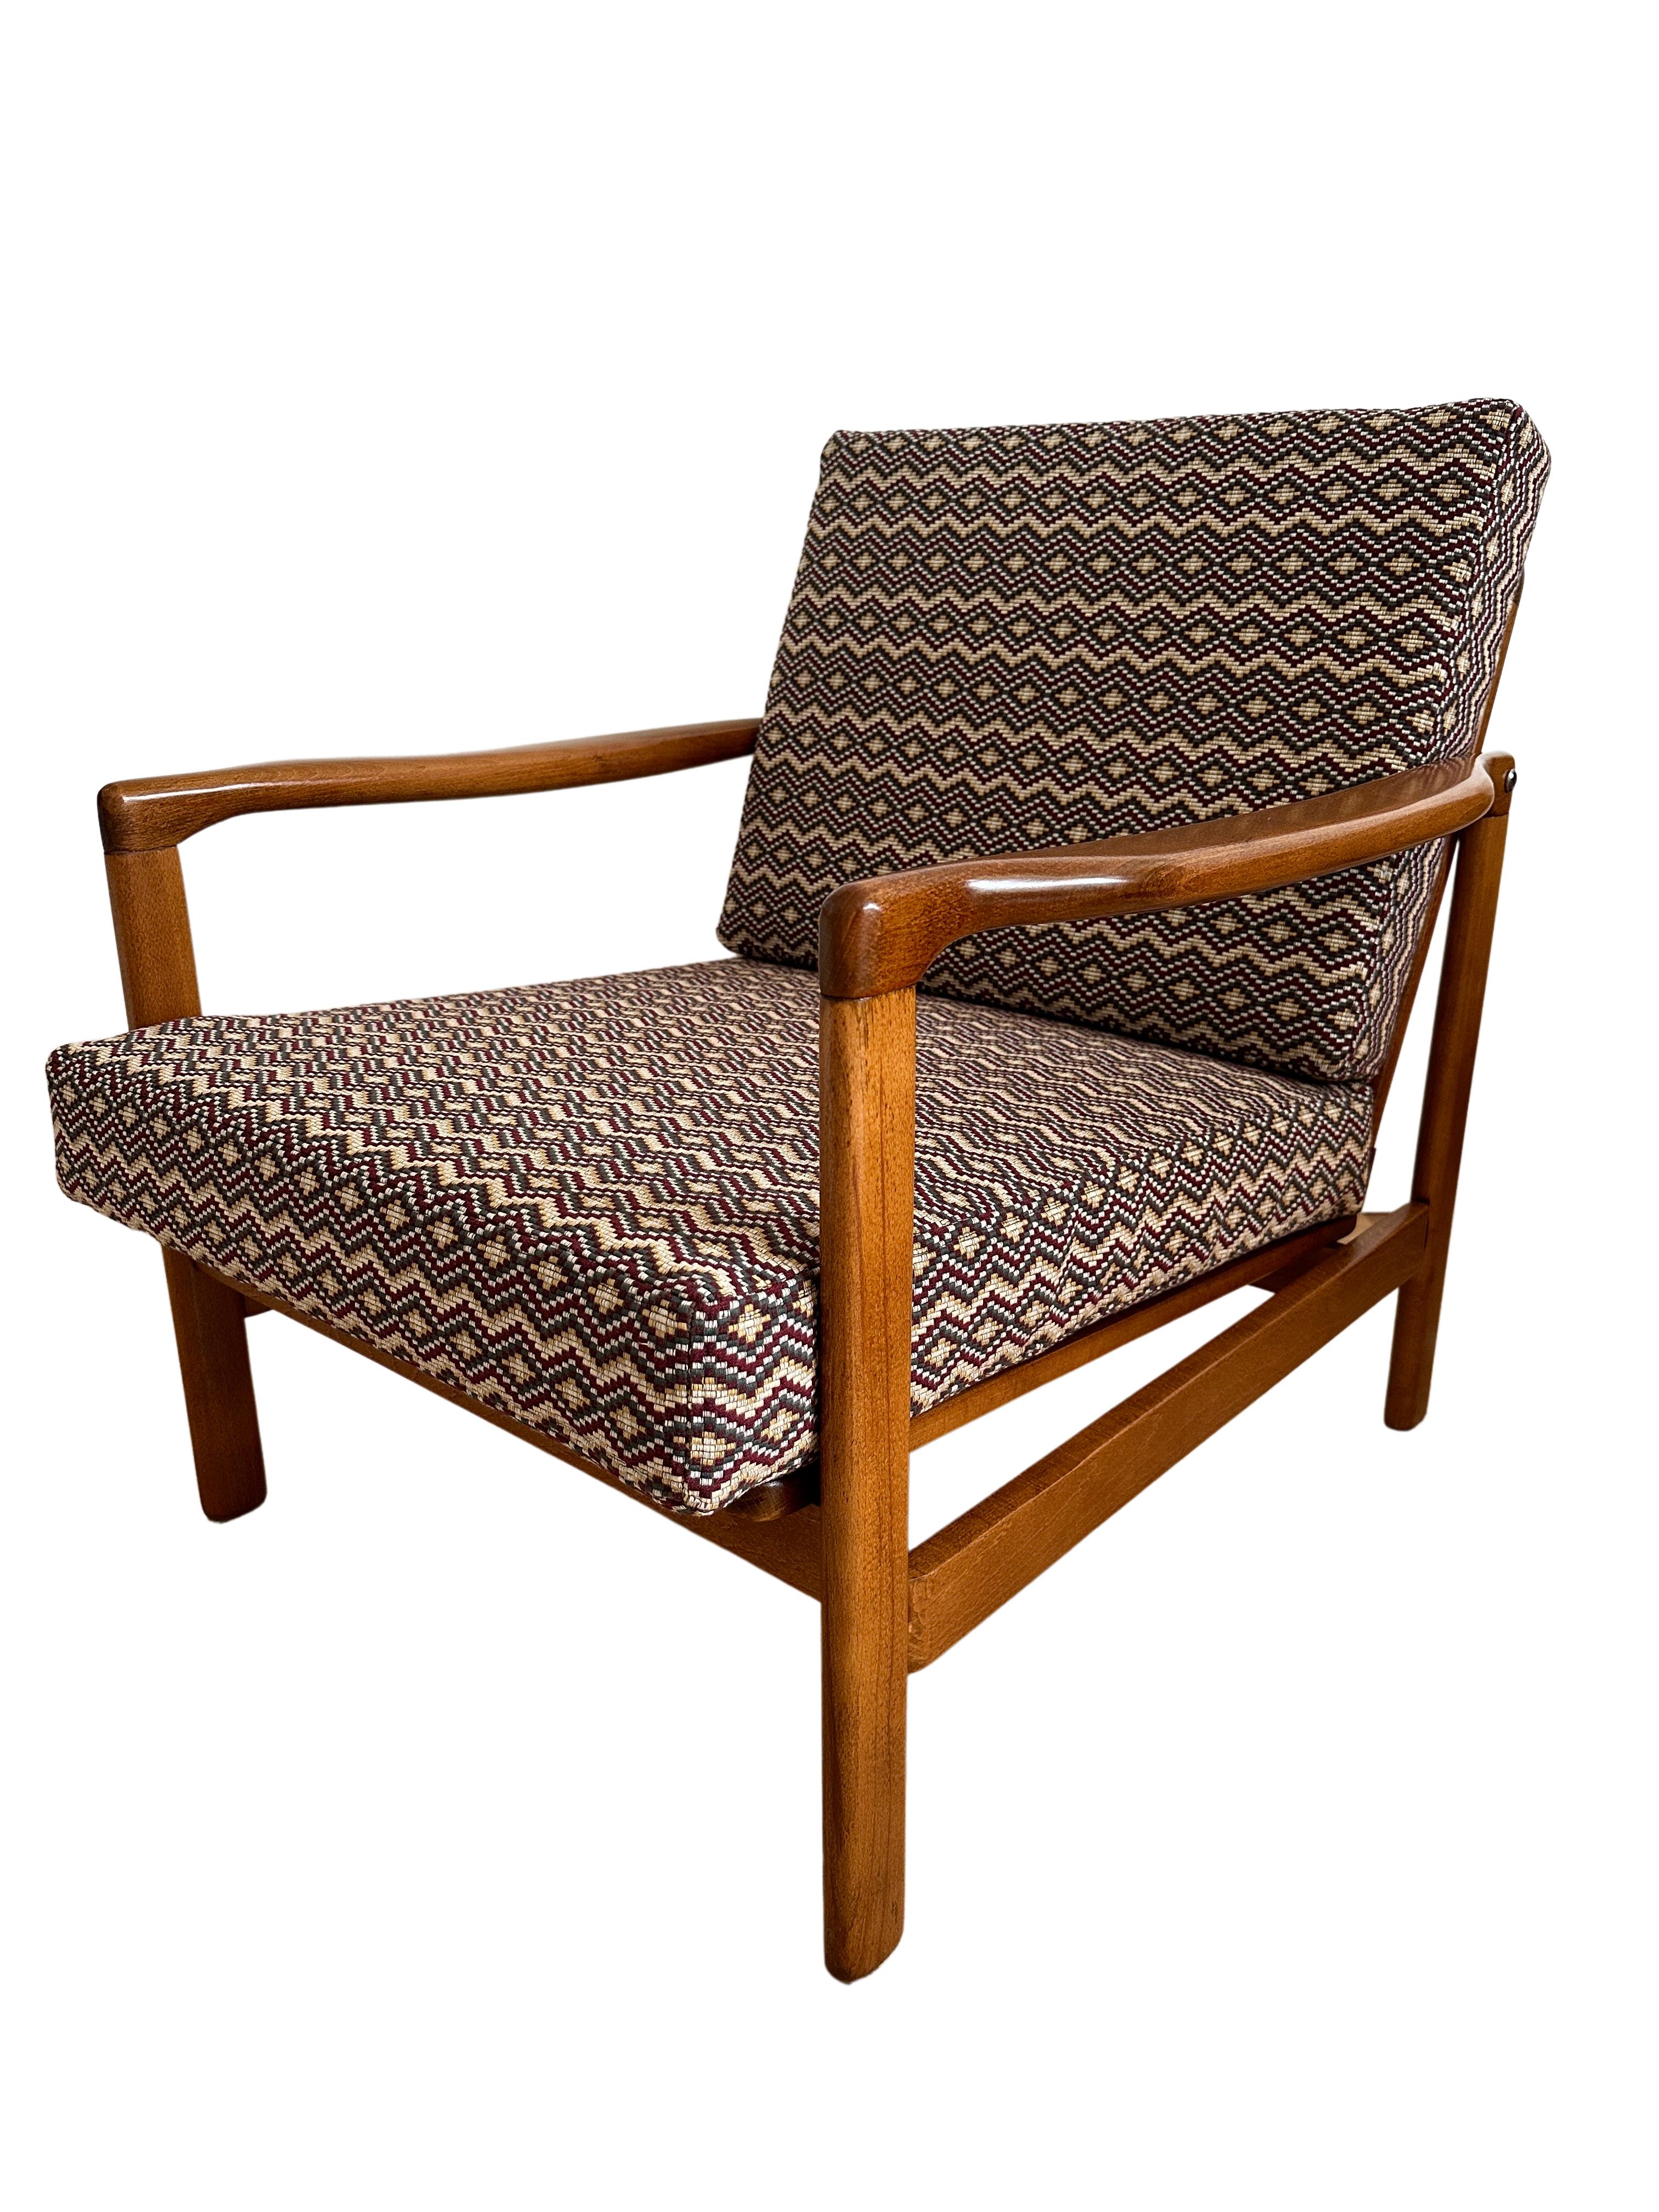 Polish Midcentury Armchair, in Geometric and Ethnic Fabric, Europe, 1960s For Sale